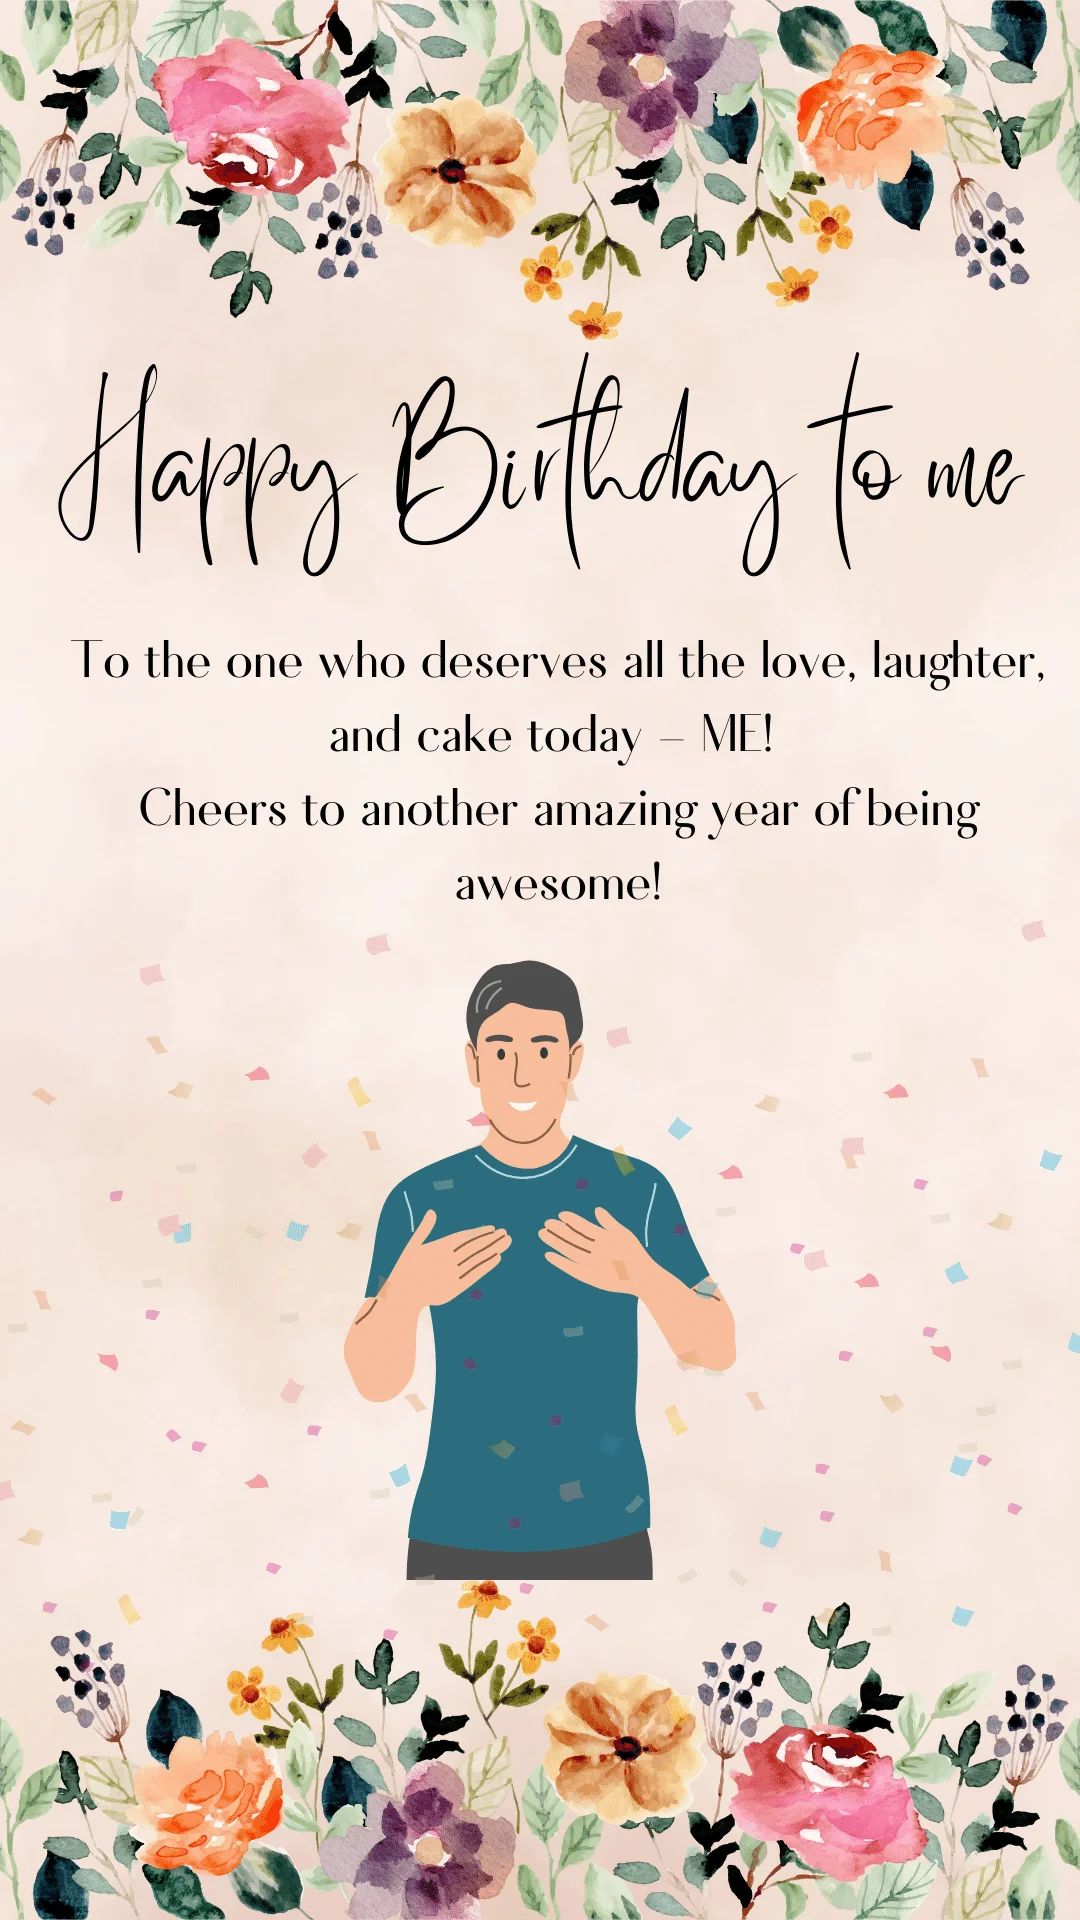 Personal-Growth-Reflections-Birthday-Cards